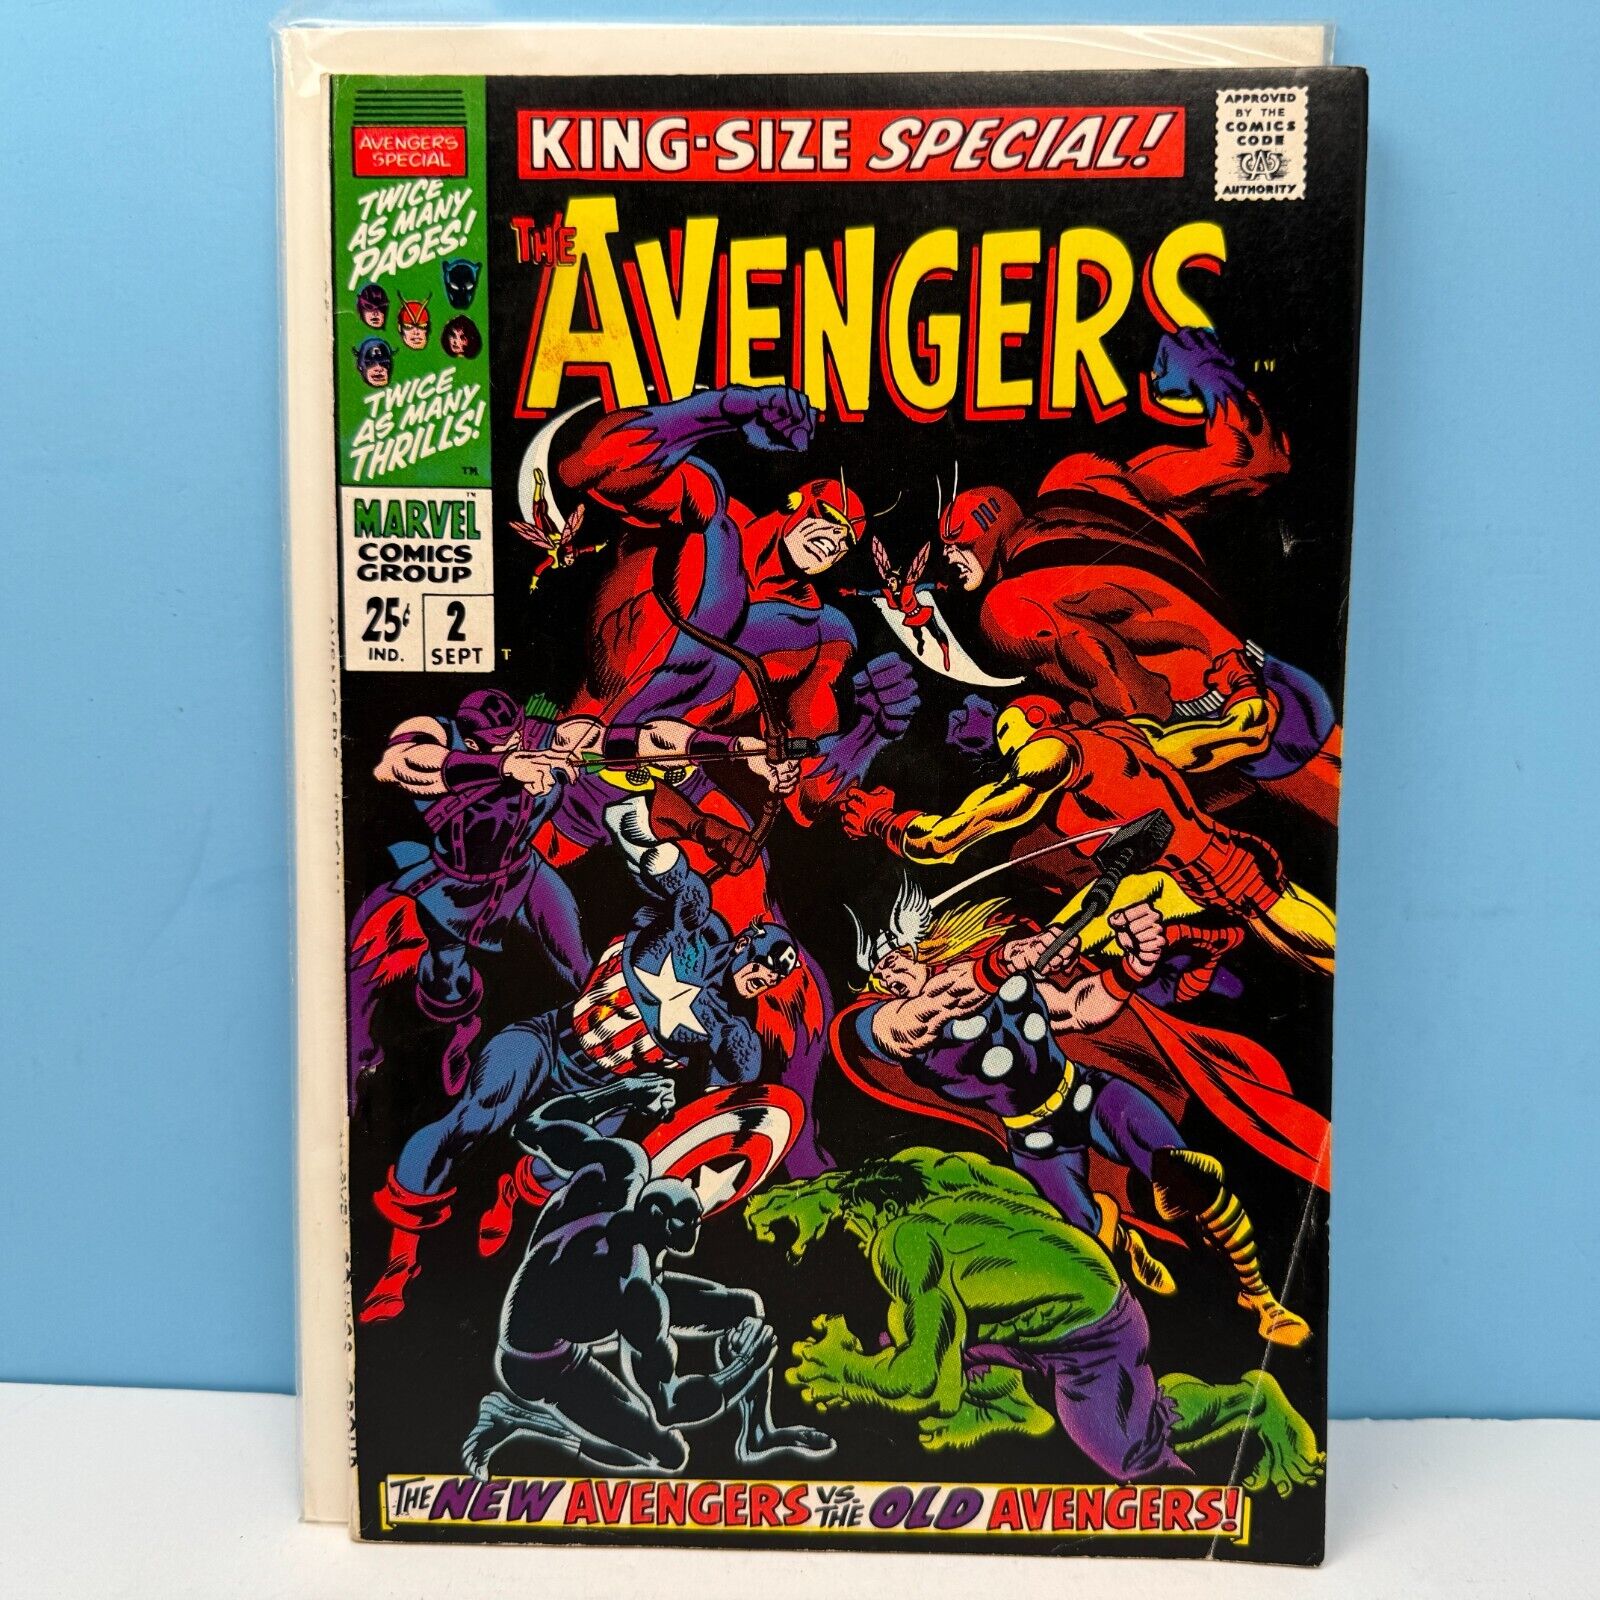 AVENGERS ANNUAL #2 1ST SCARLET CENTURION JOHN BUSCEMA KING SIZE SPECIAL